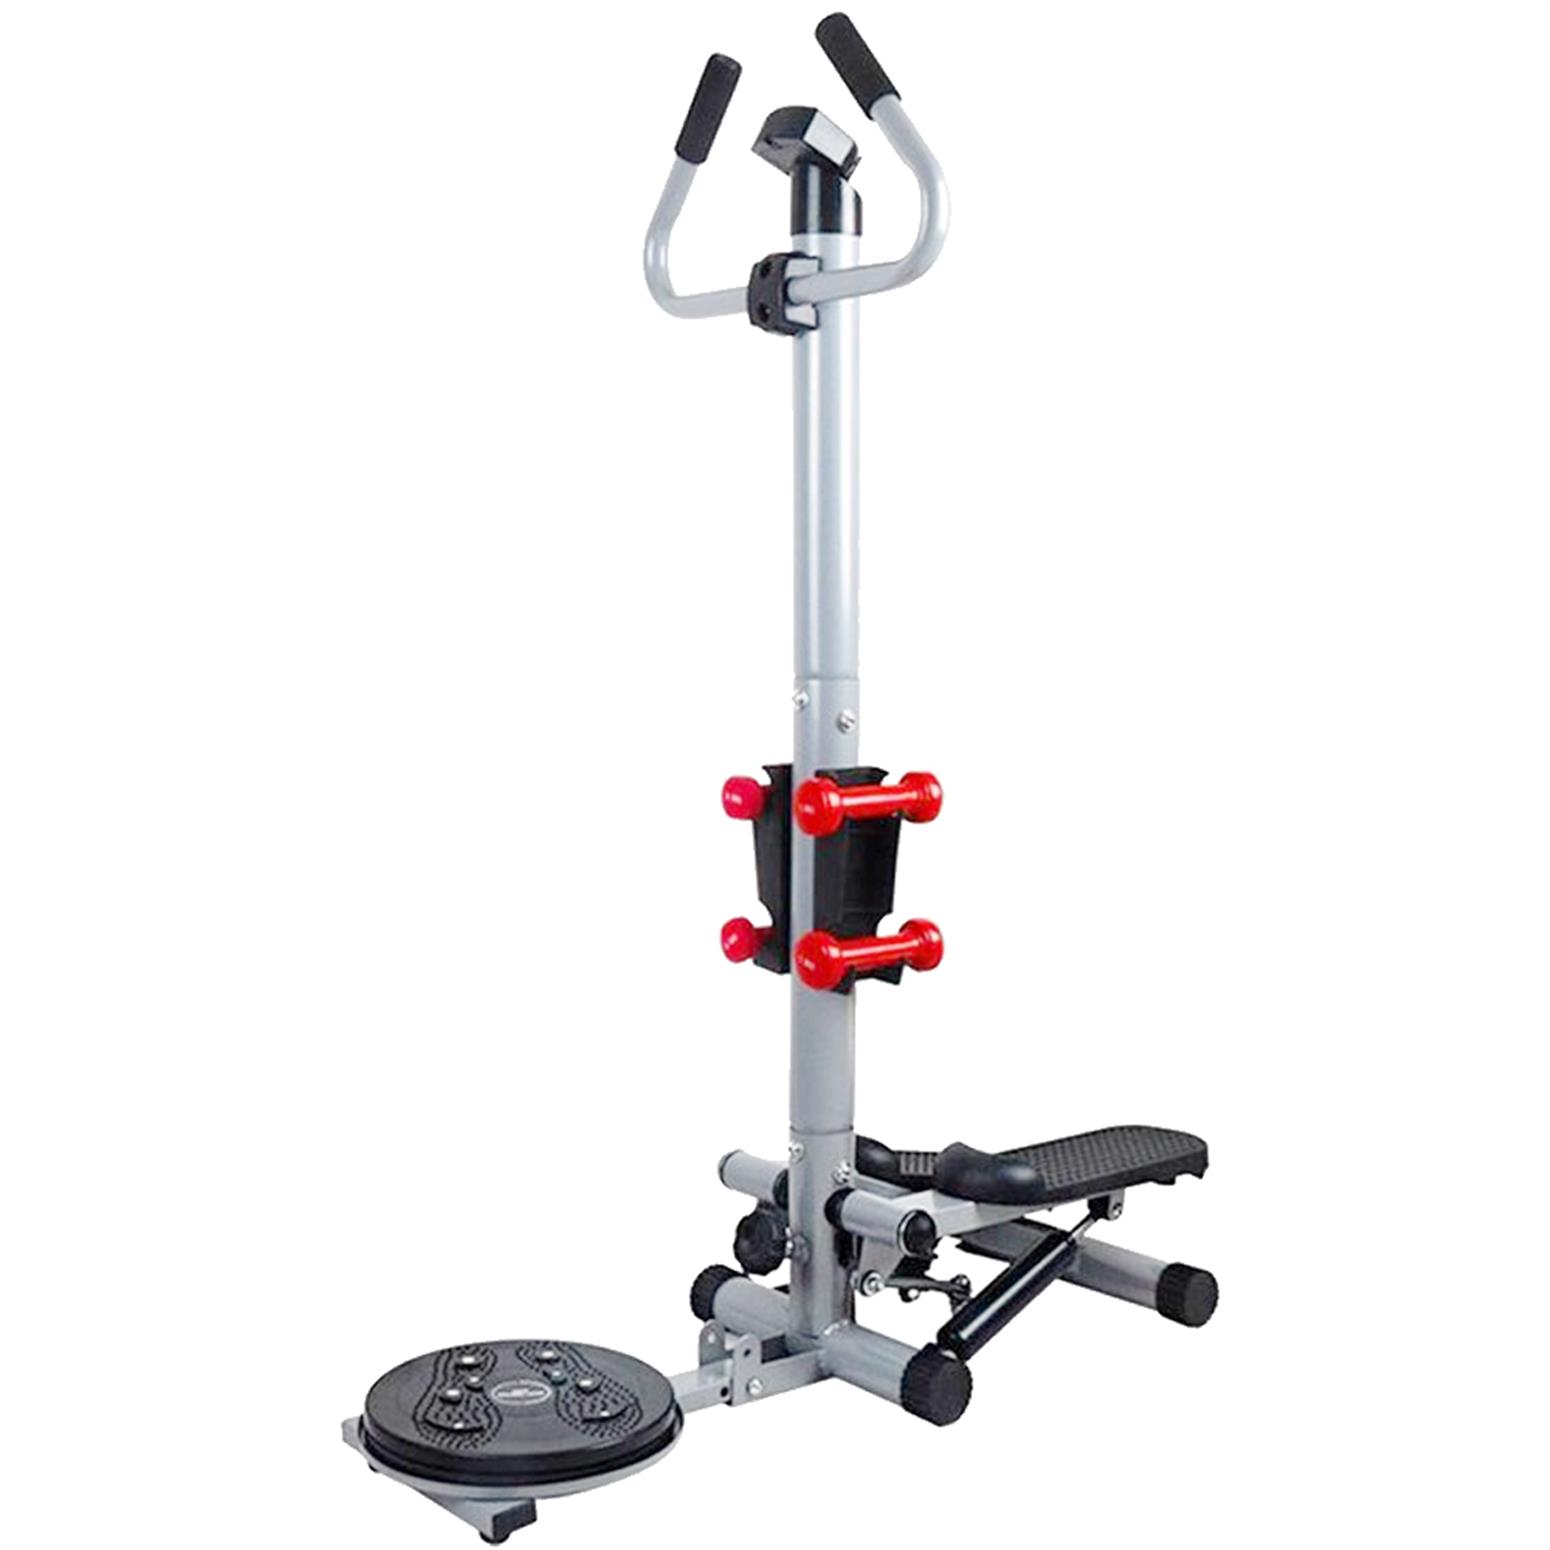 GYM Equipment 3 IN 1